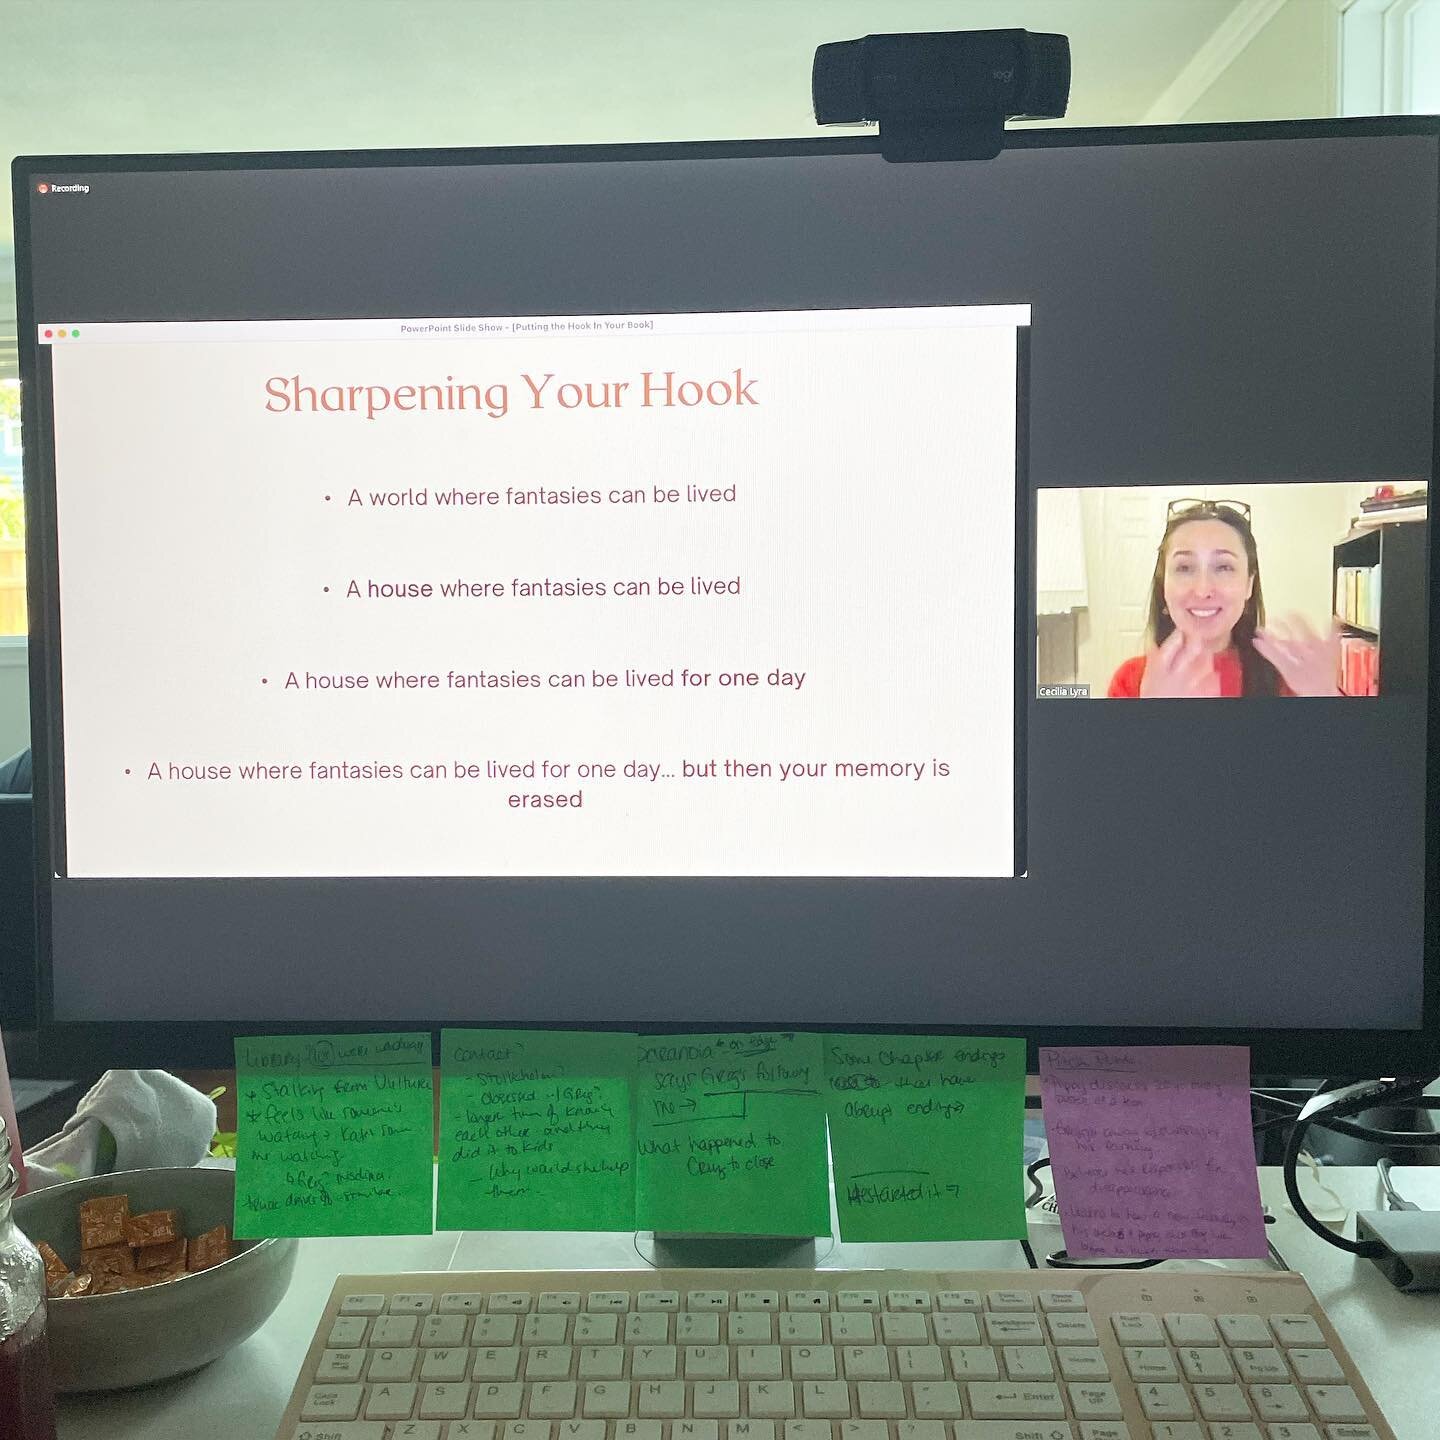 It wouldn&rsquo;t be pitch-prep time without sharpening v important selling skills. 

Why does a hook &amp; pitch feel way harder than actually writing the book!?! 😂

Thanks for a helpful session @cece_lyra_agent 👏🏻👏🏻👏🏻

#hookinbook #amqueryin